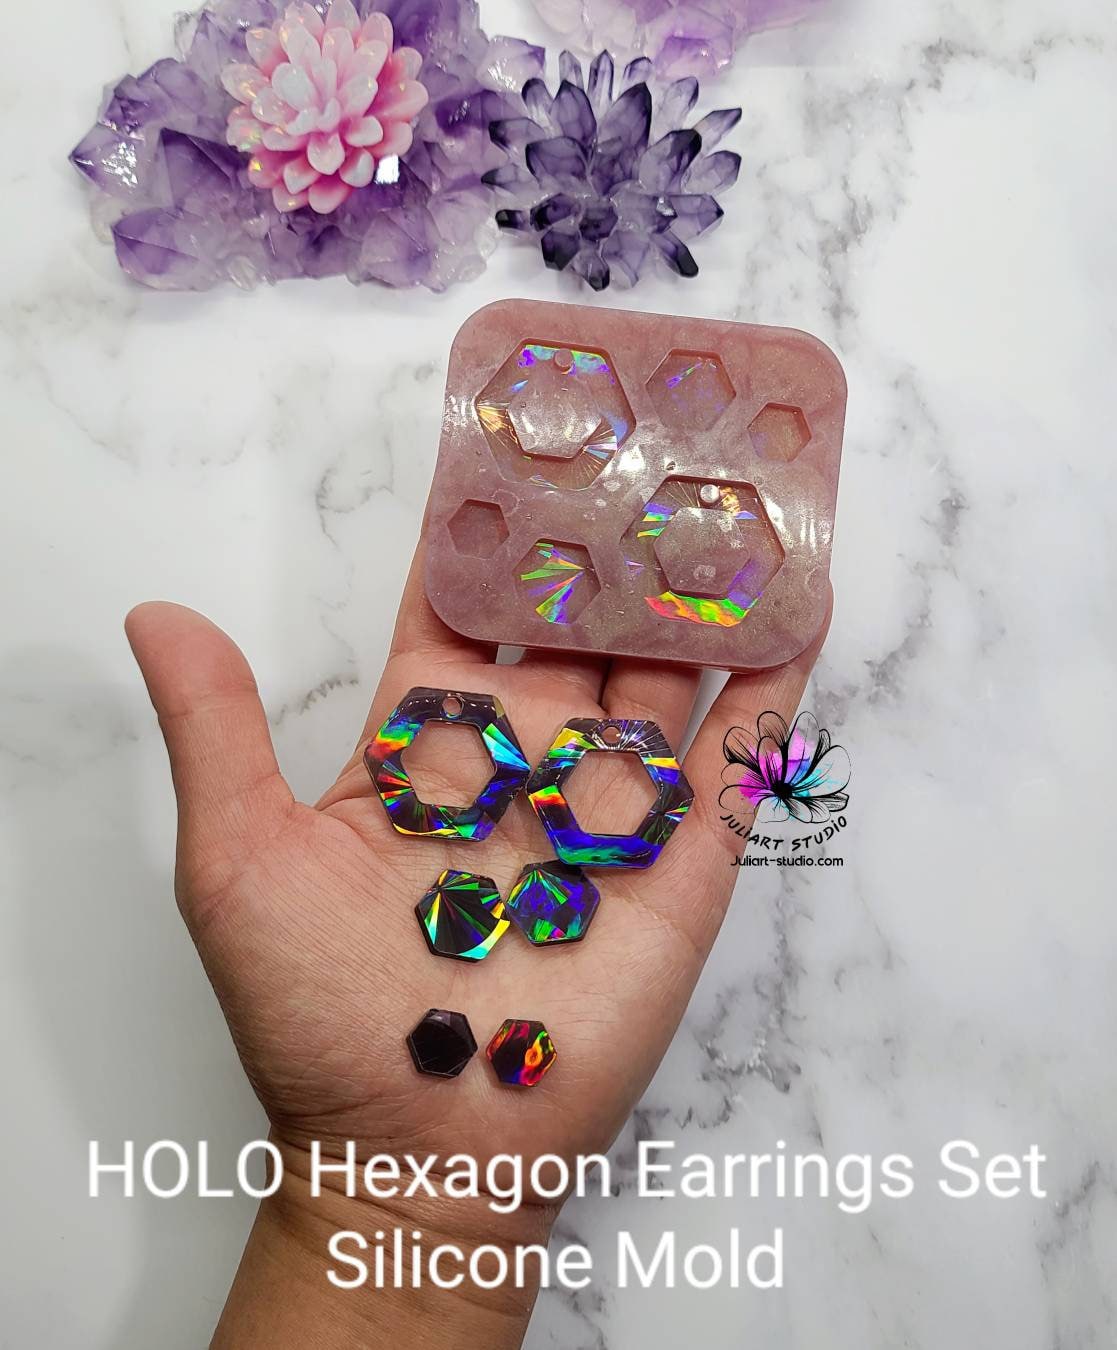 silicone mould contains 4/5 pairs of holographic earrings